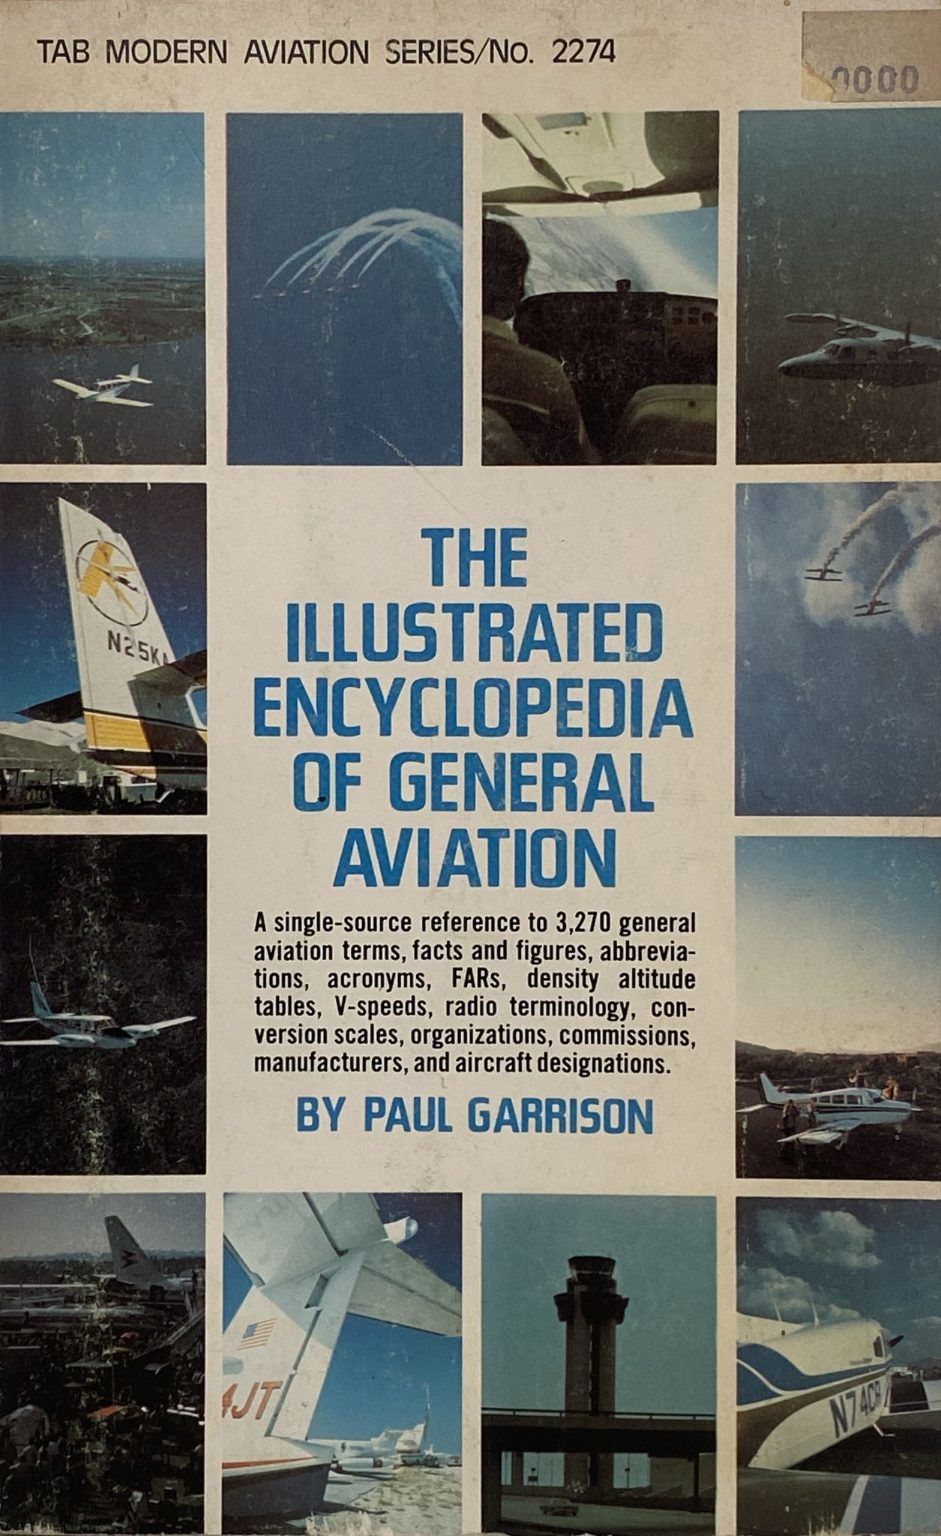 THE ILLUSTRATED ENCYCLOPEDIA OF GENERAL AVIATION